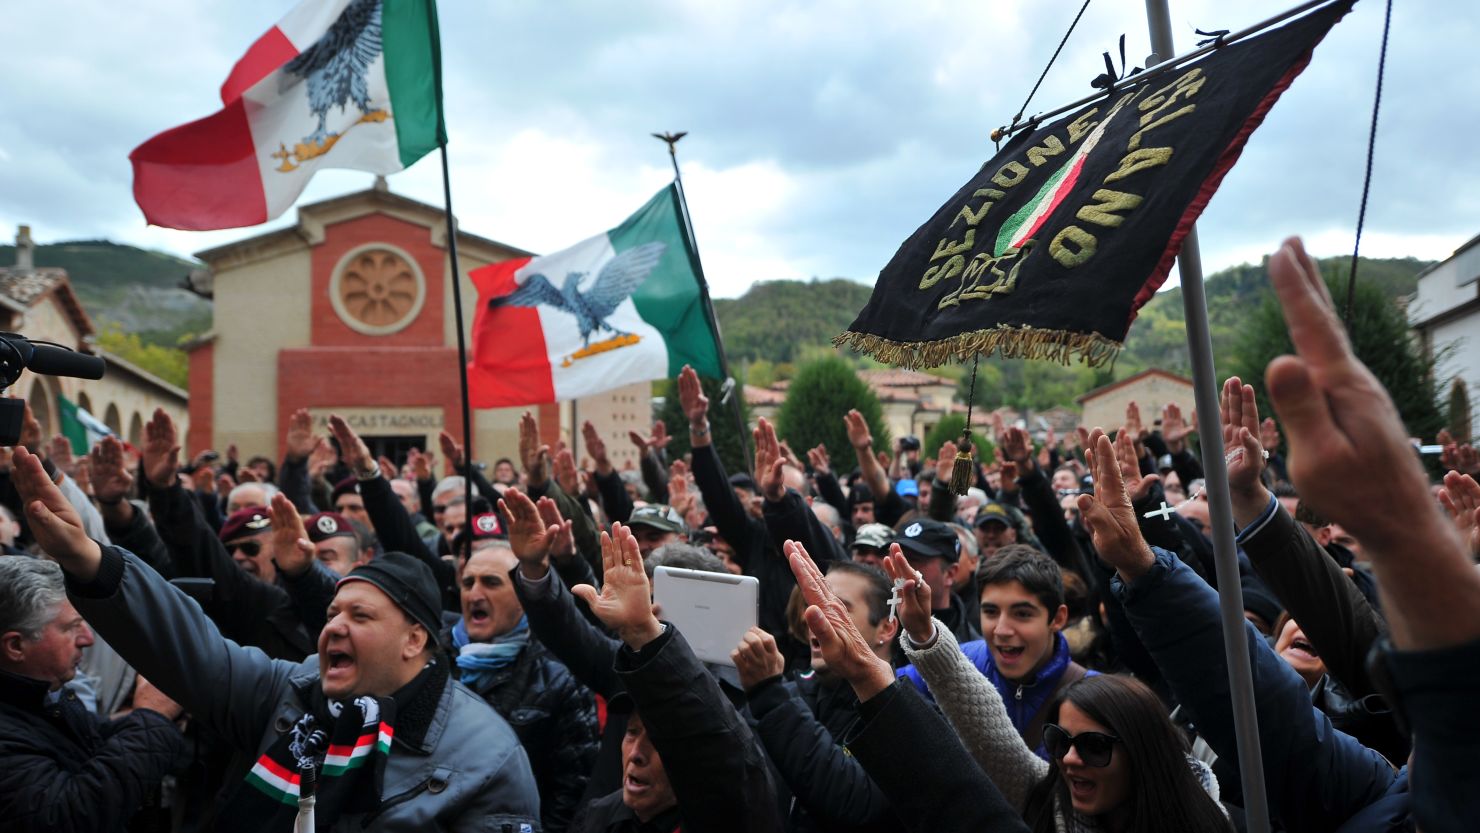 Far-right militants make the fascist salute during a rally marking the 90th anniversary of the "March on Rome" in 2012.